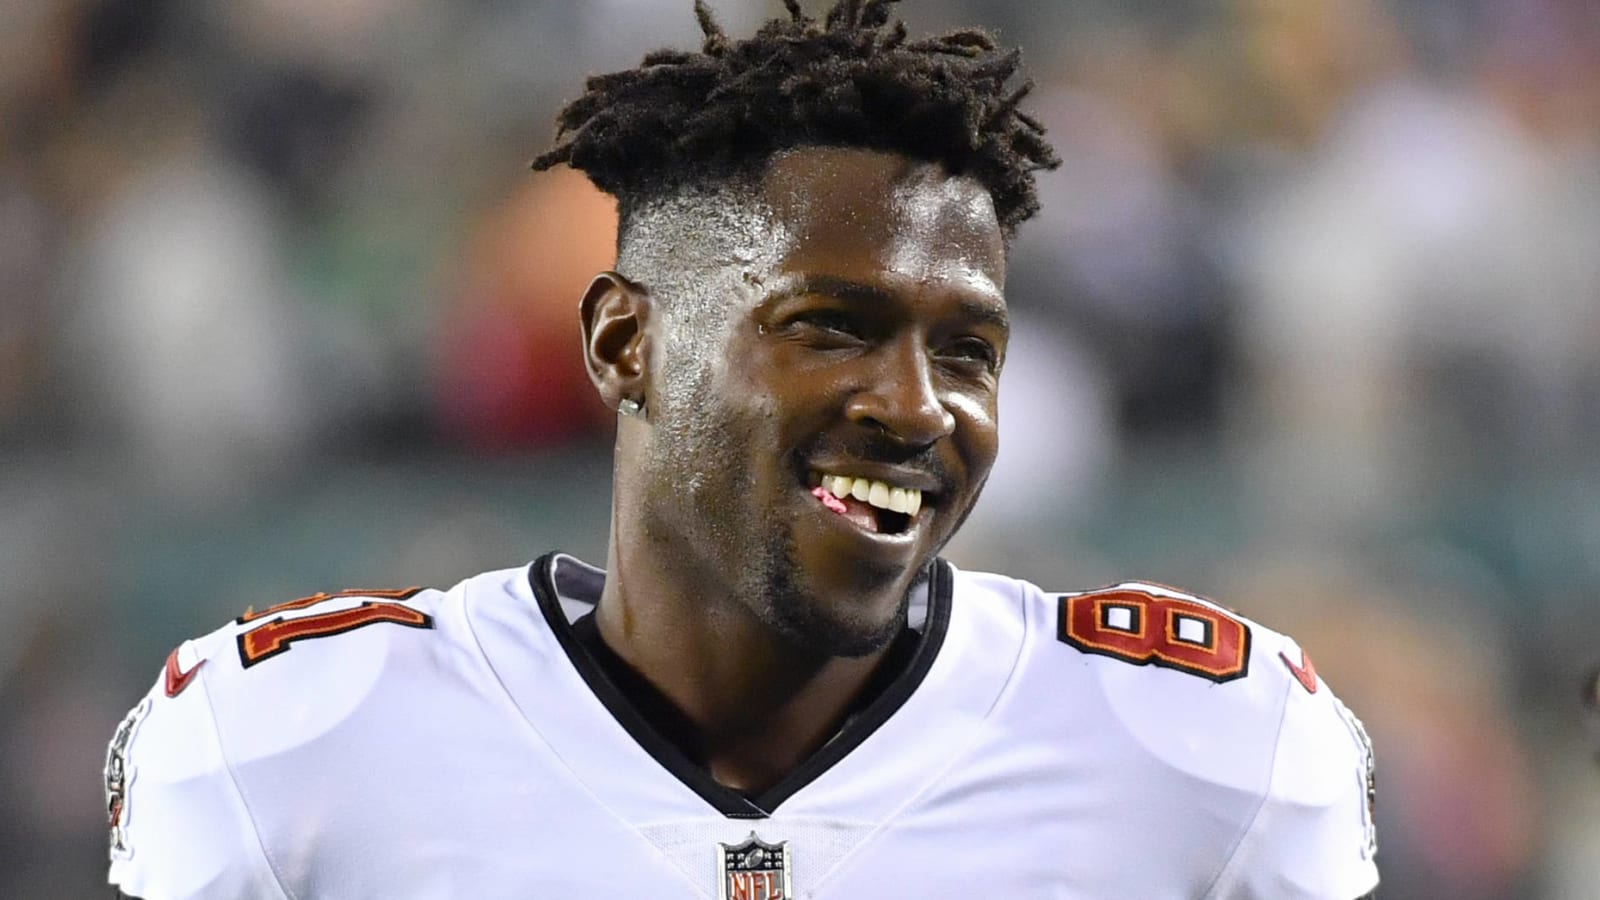 Antonio Brown continues campaign to play for Ravens